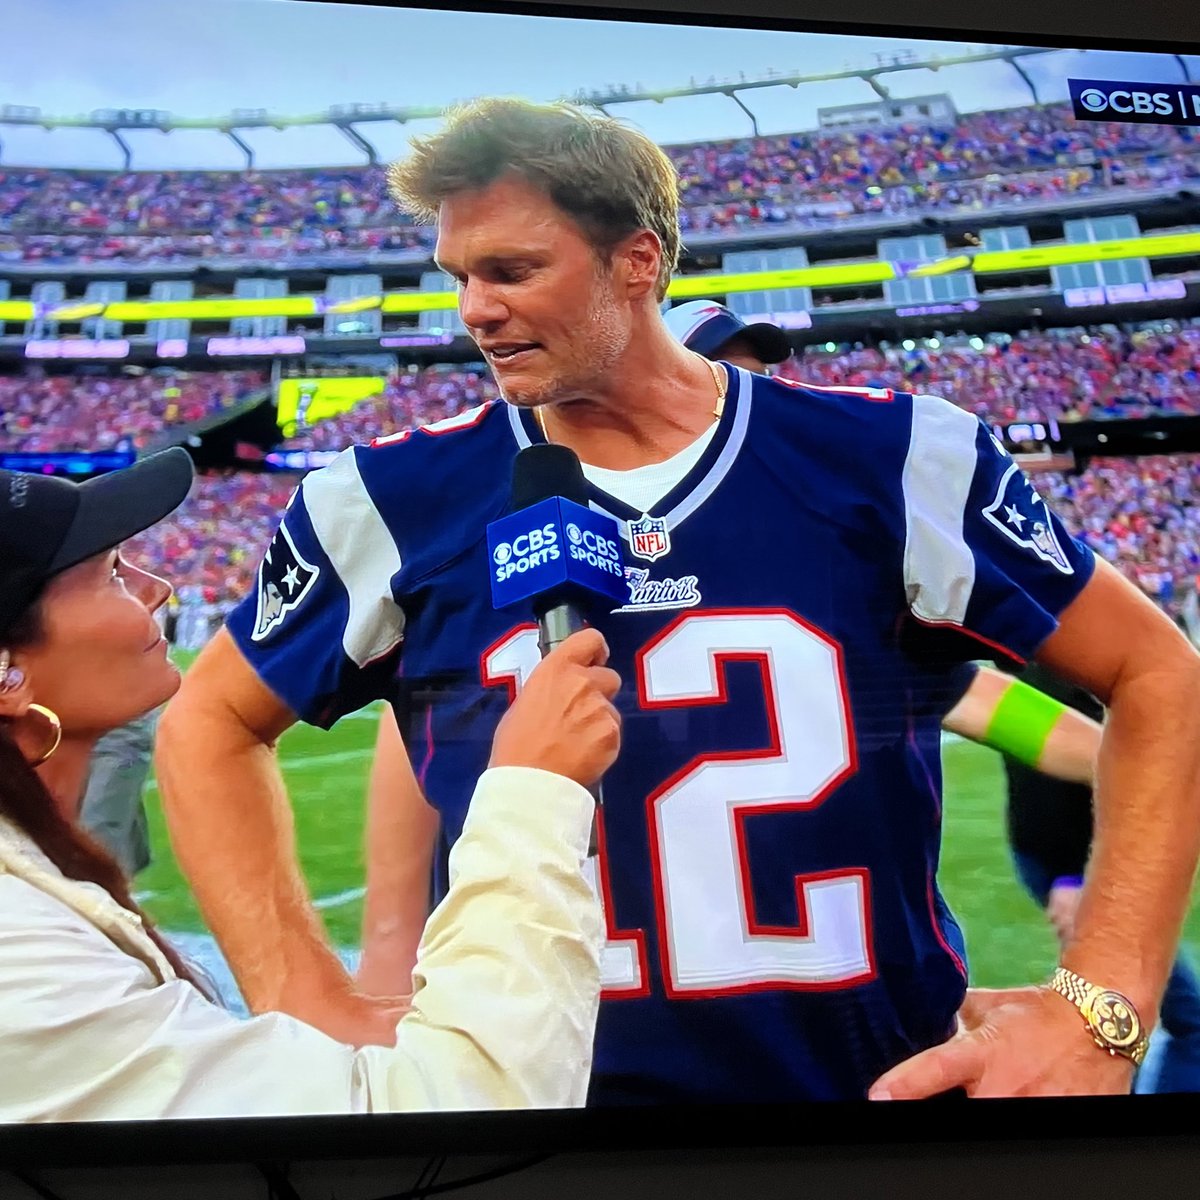 Tom Brady in a Patriots jersey, all is good in the world again.